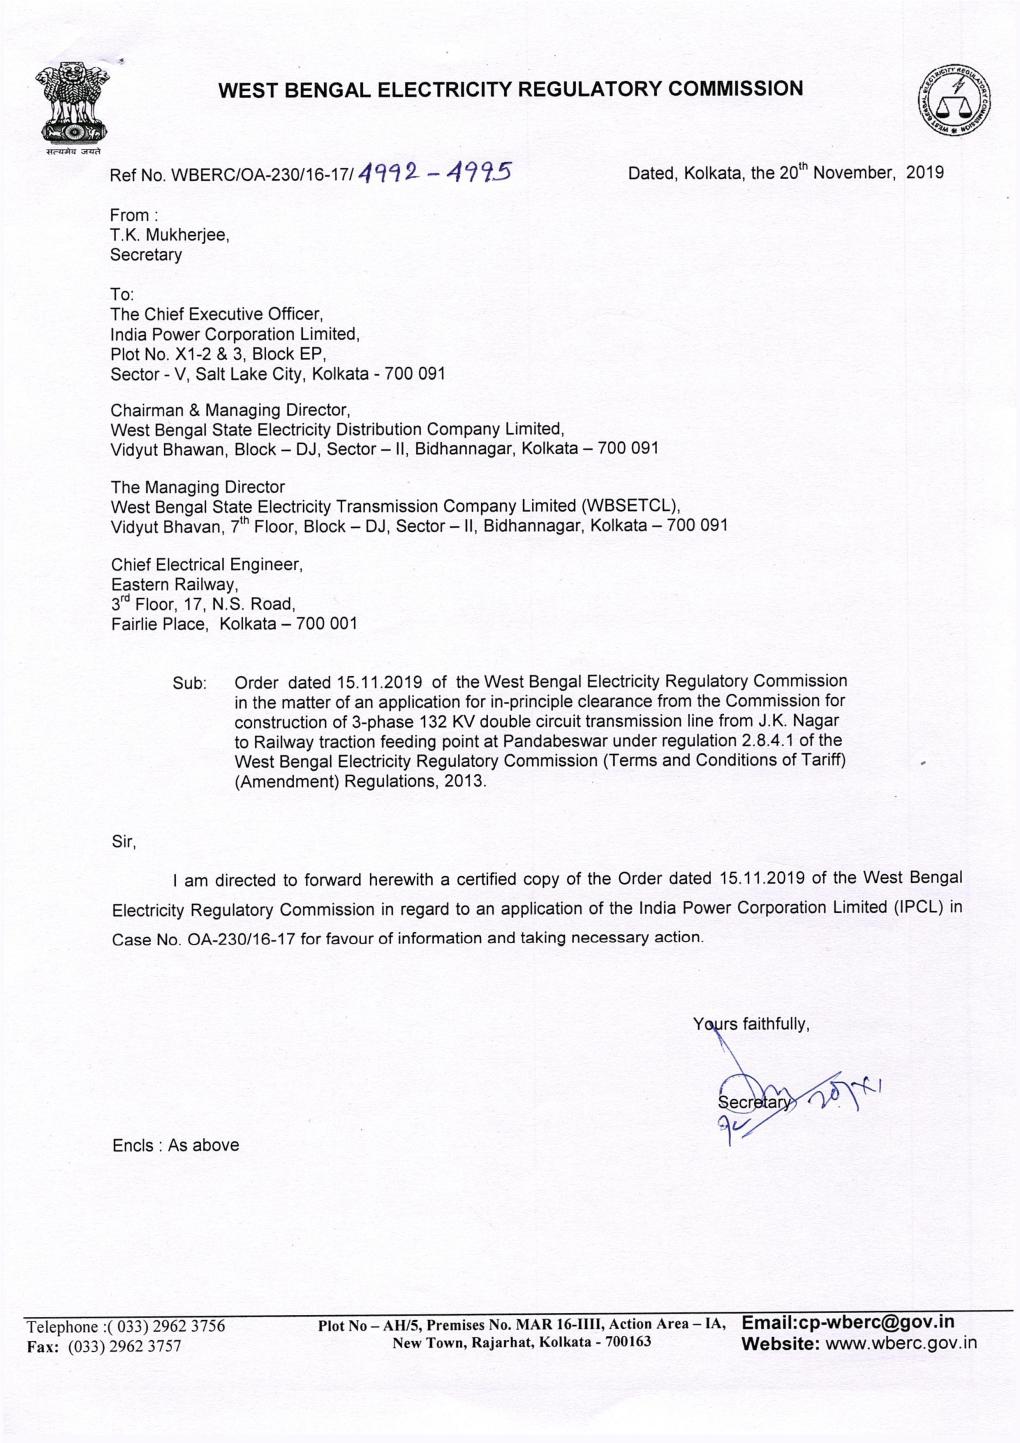 West Bengal Electricity Regulatory Commission